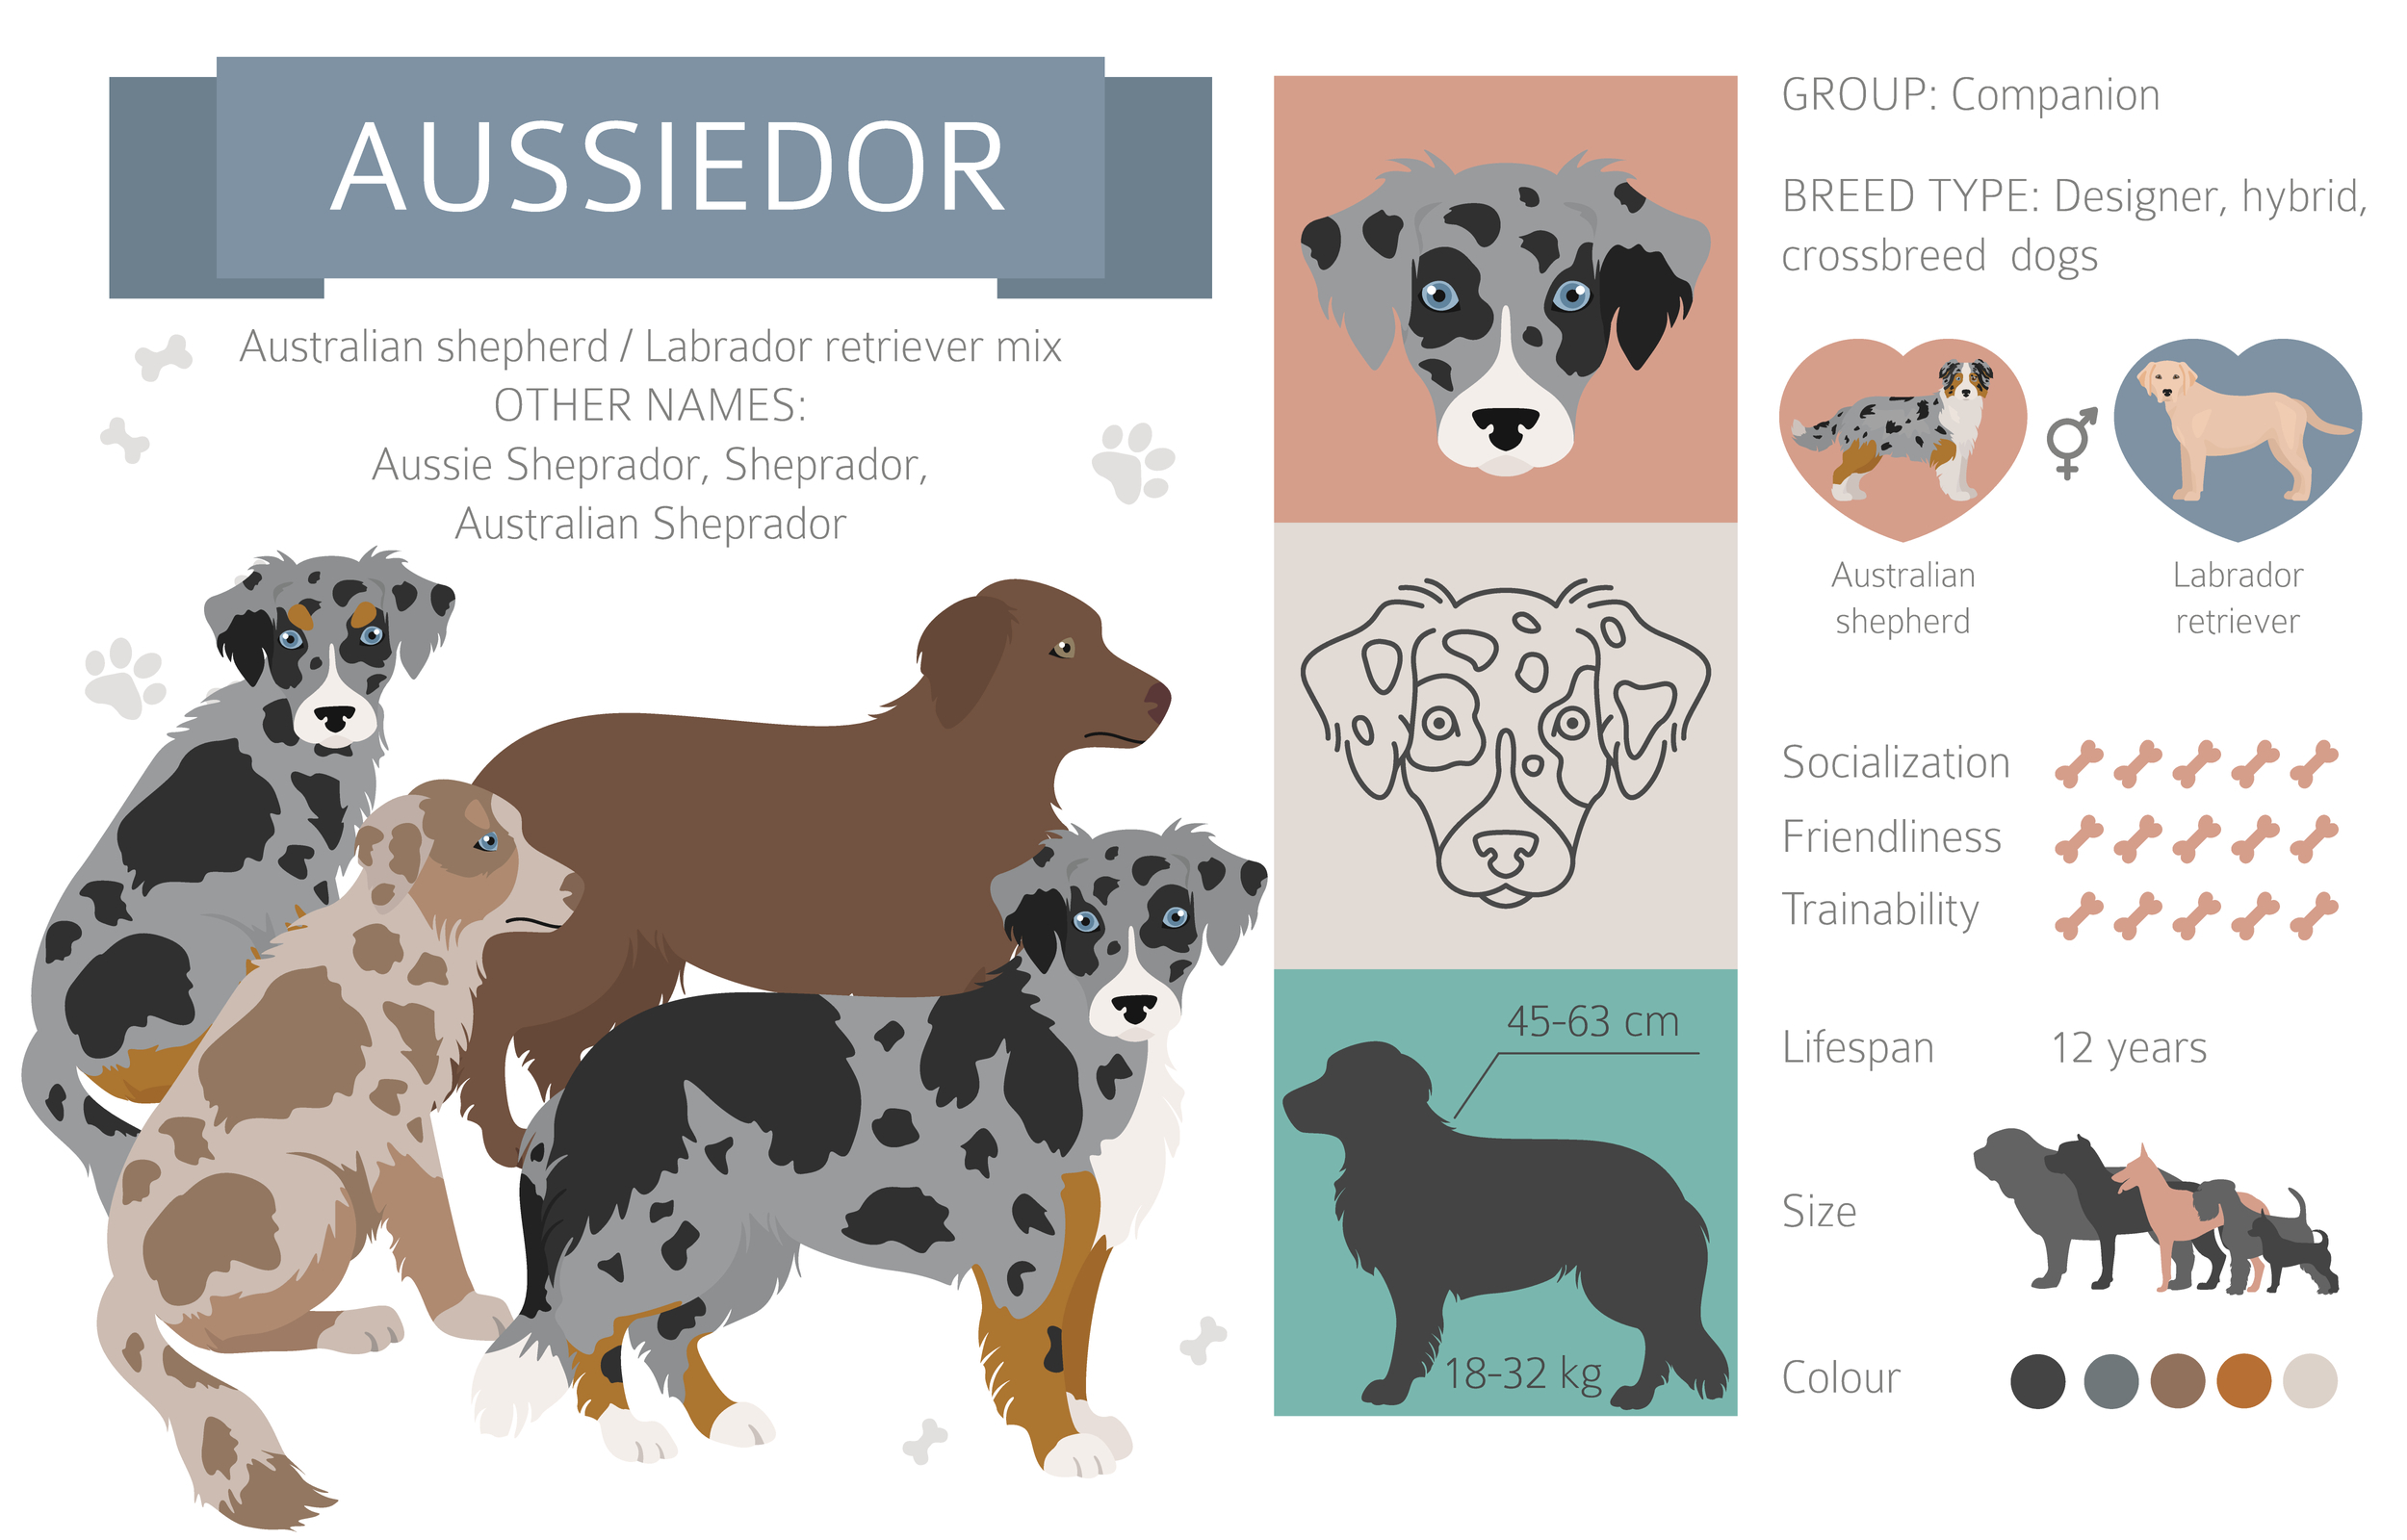 An infographic of the Aussiedor breed